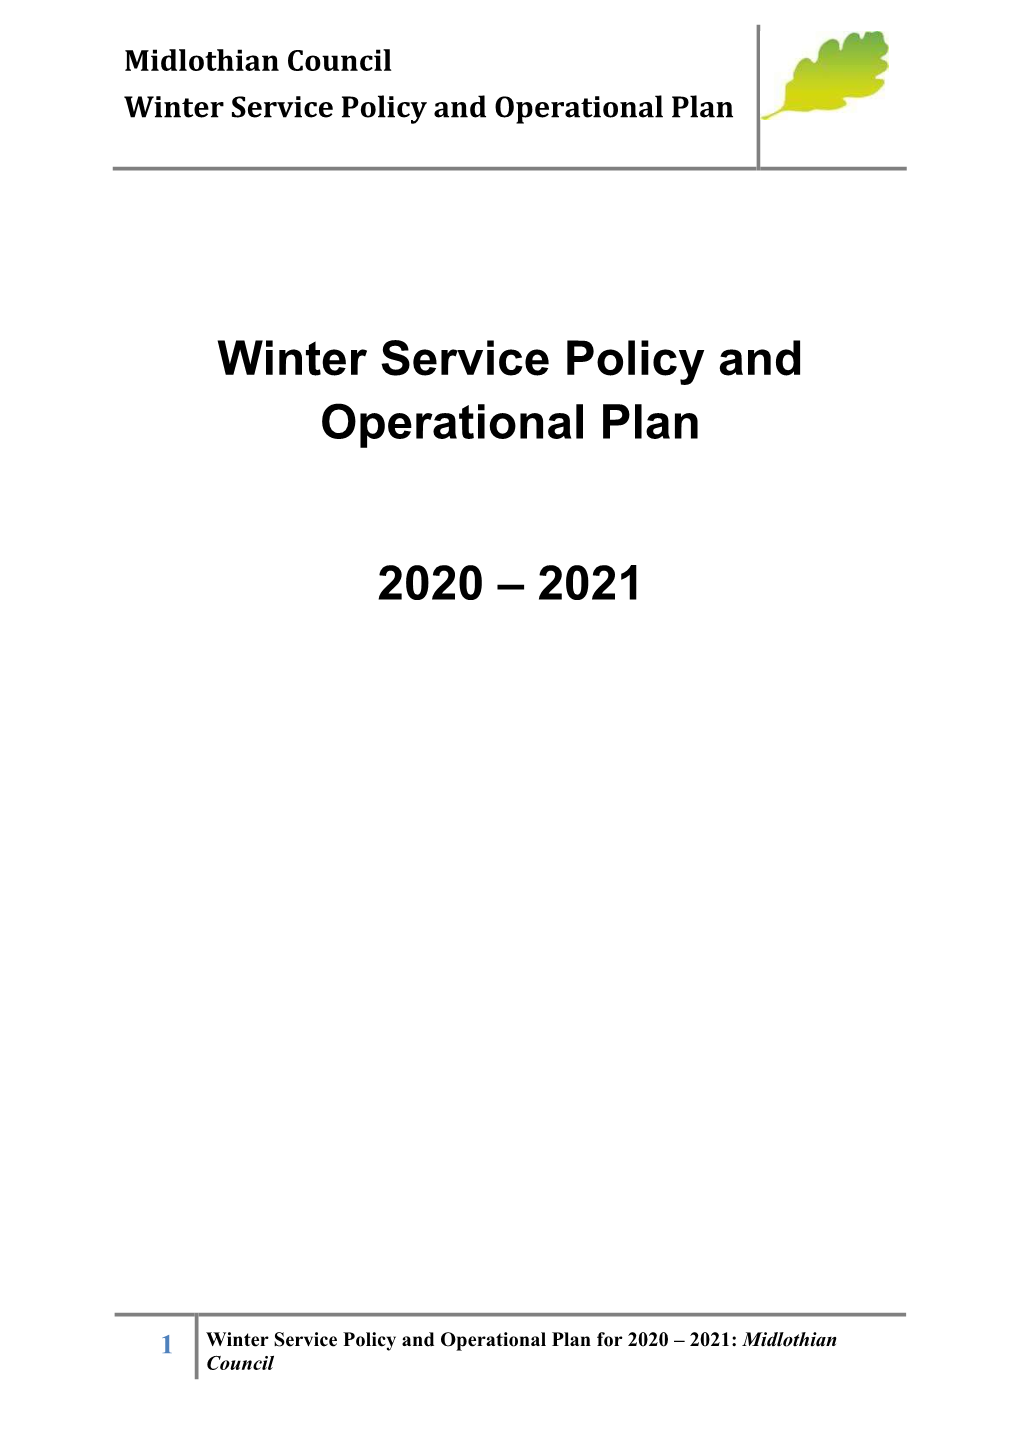 Winter Service Policy and Operational Plan 2020 – 2021